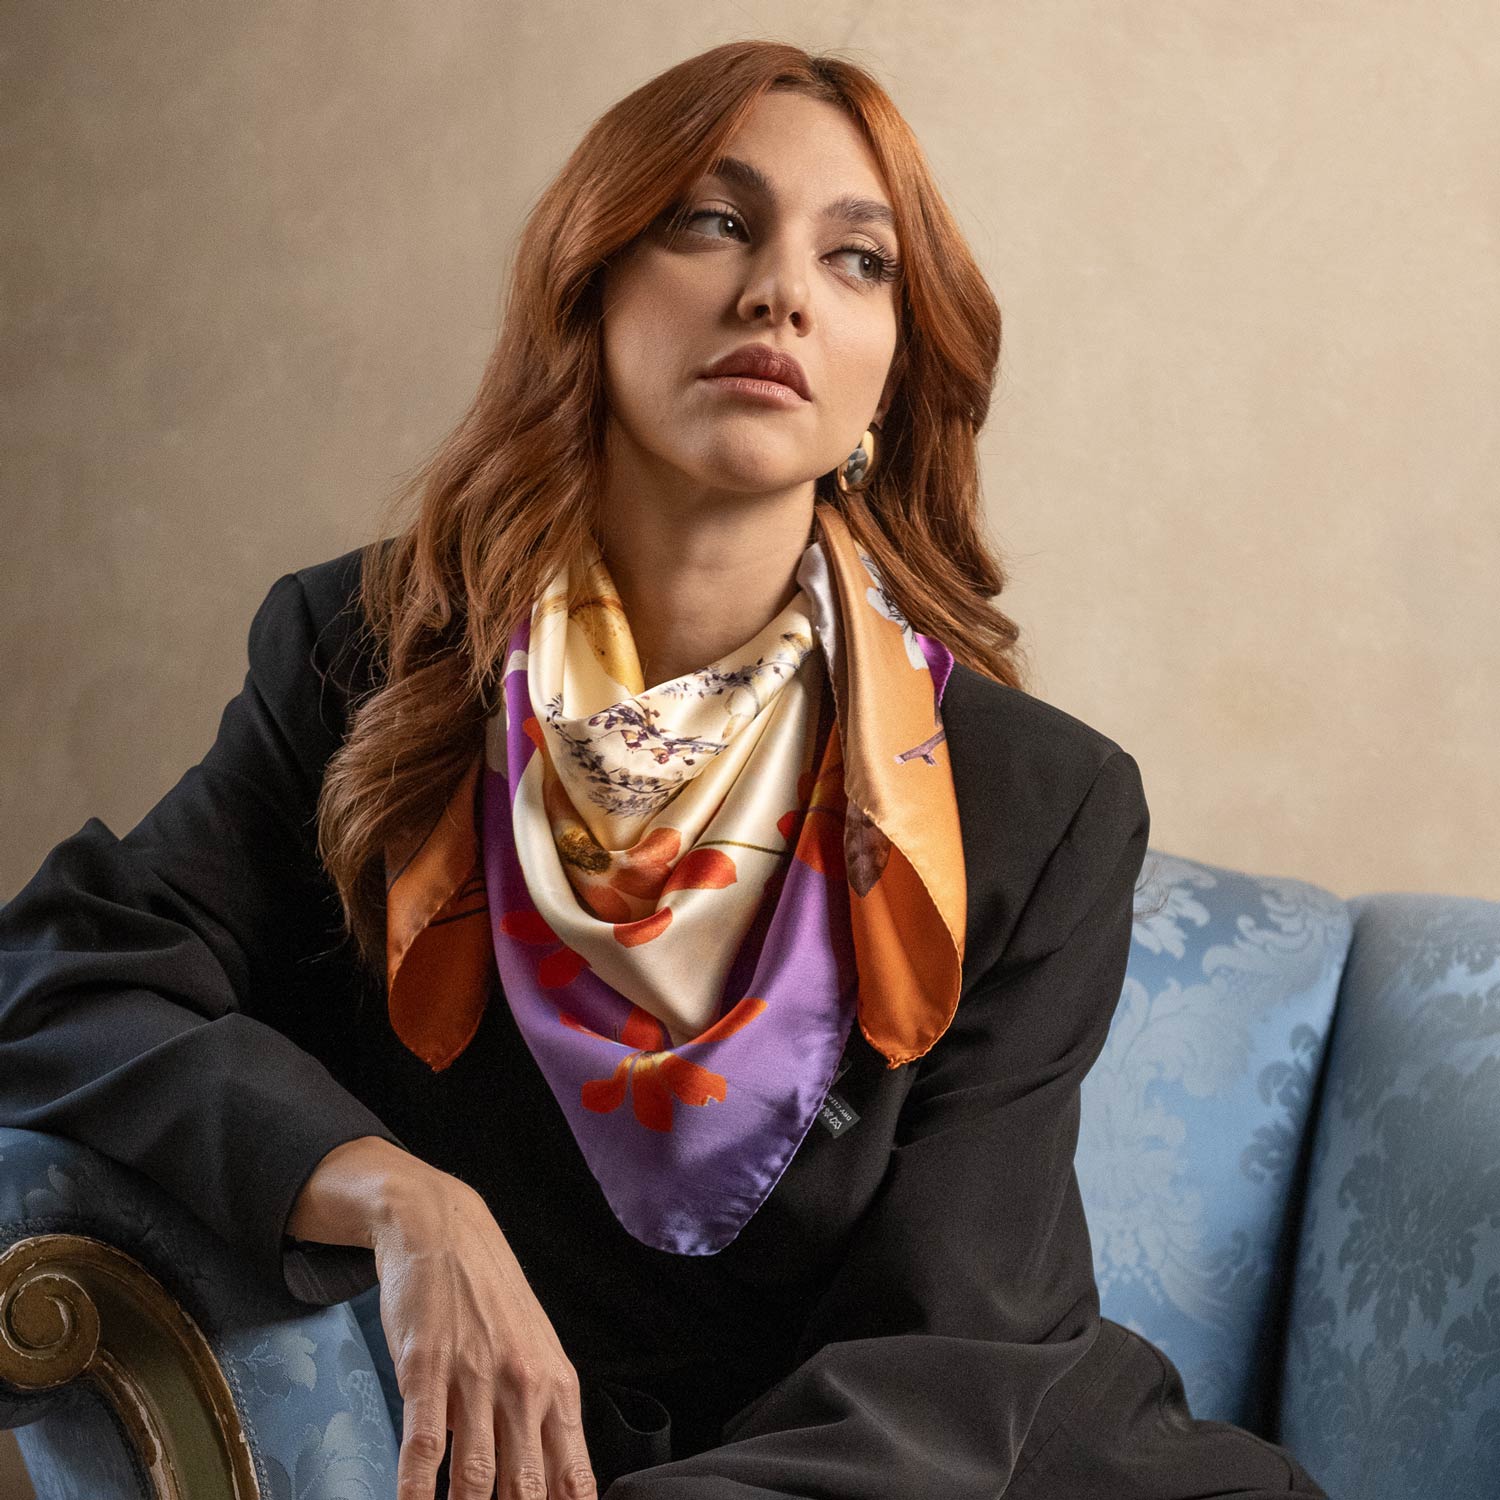 Scarves - How to Wear a 90cm Carre/Silk Twill Casually?